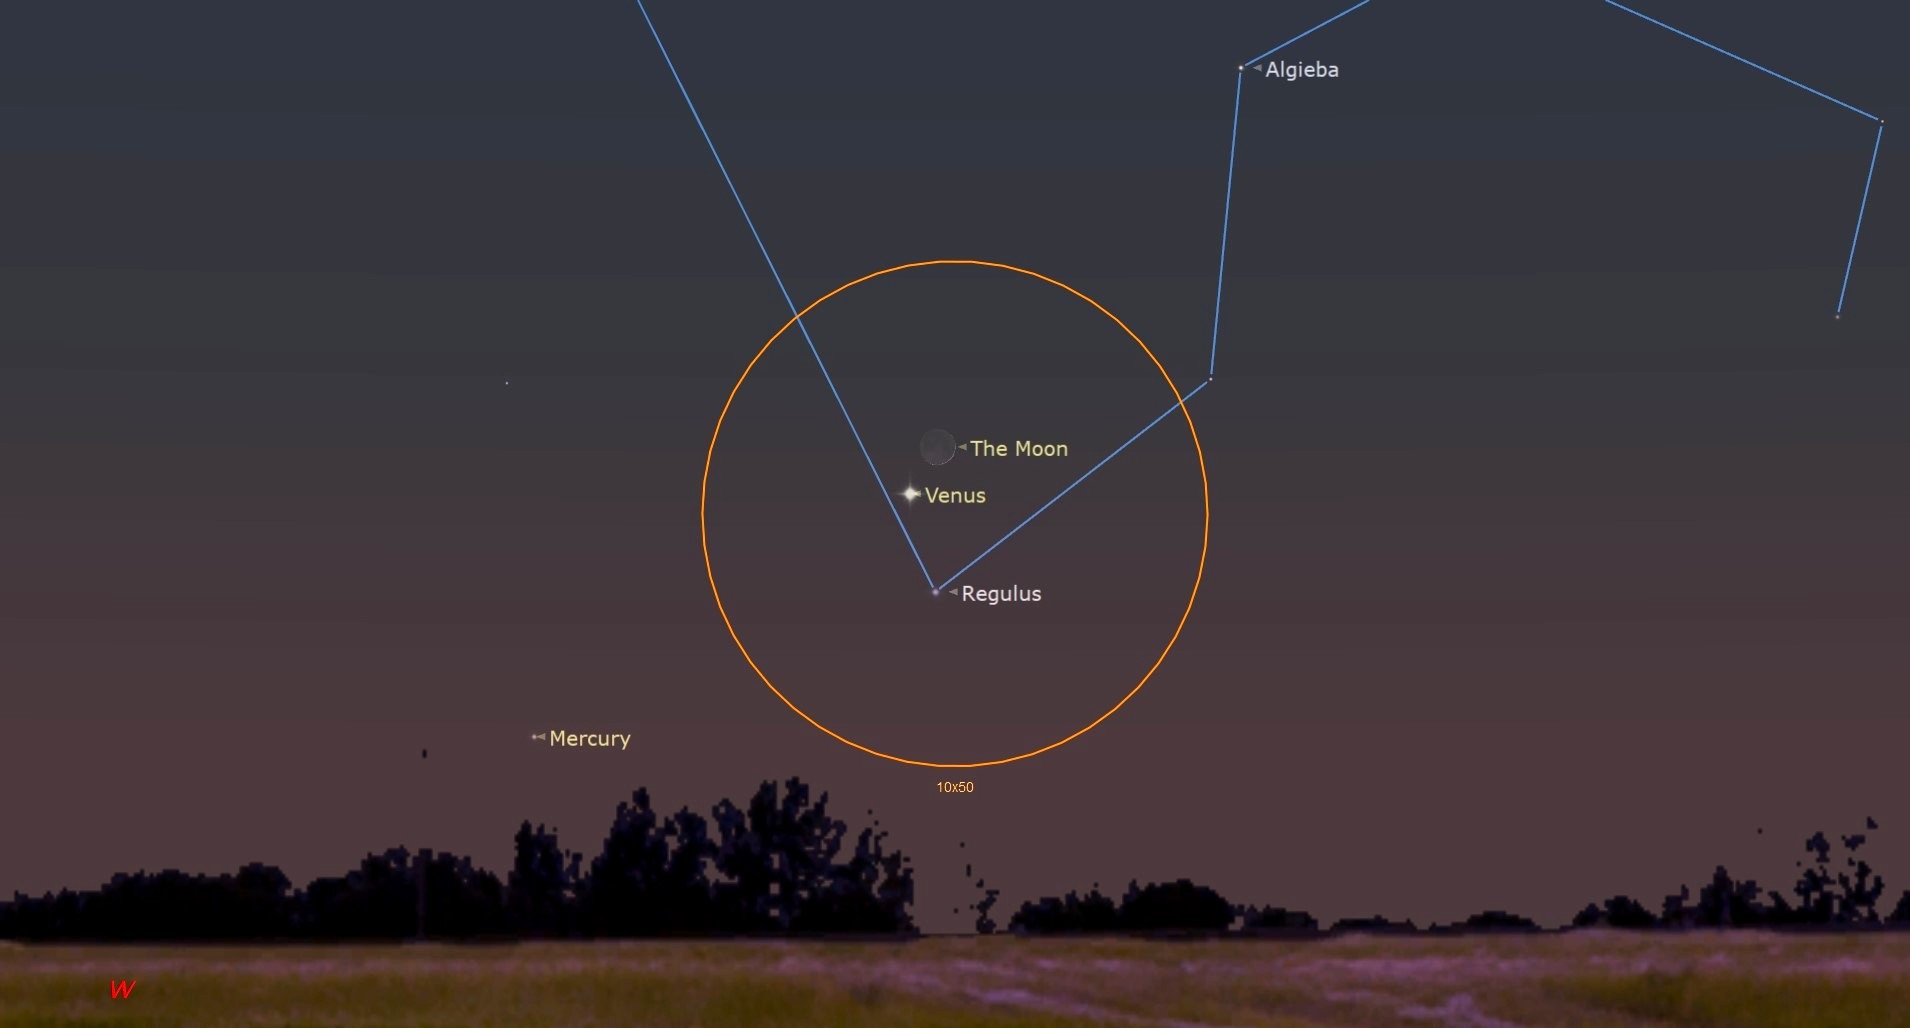  The moon and Venus join close together in the night sky Aug. 5 